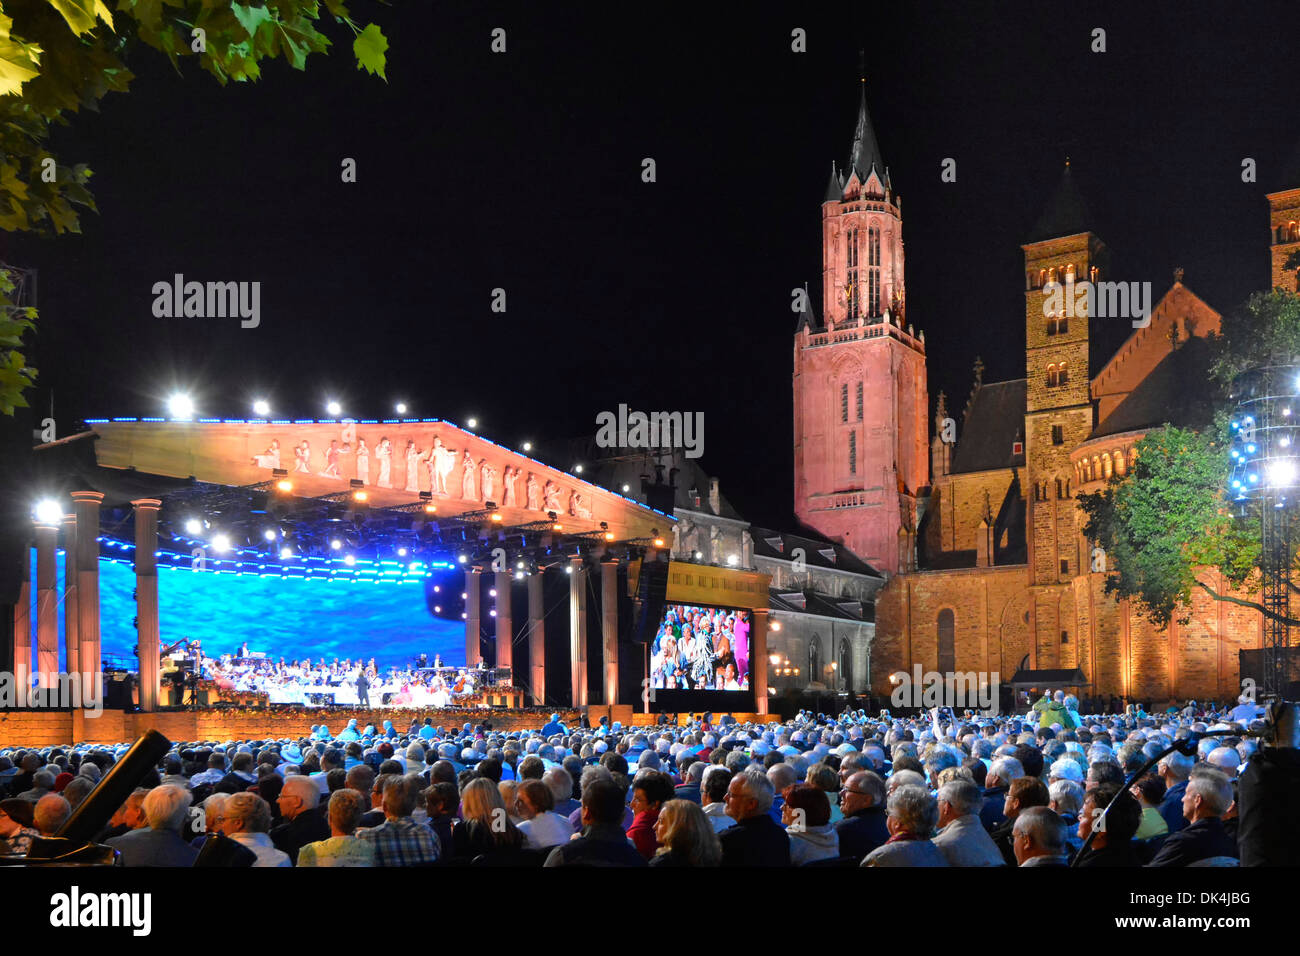 Maastricht Vrijthof Square full house audience André Rieu performing summer evening music concert blue floodlights & two floodlit historic churches EU Stock Photo